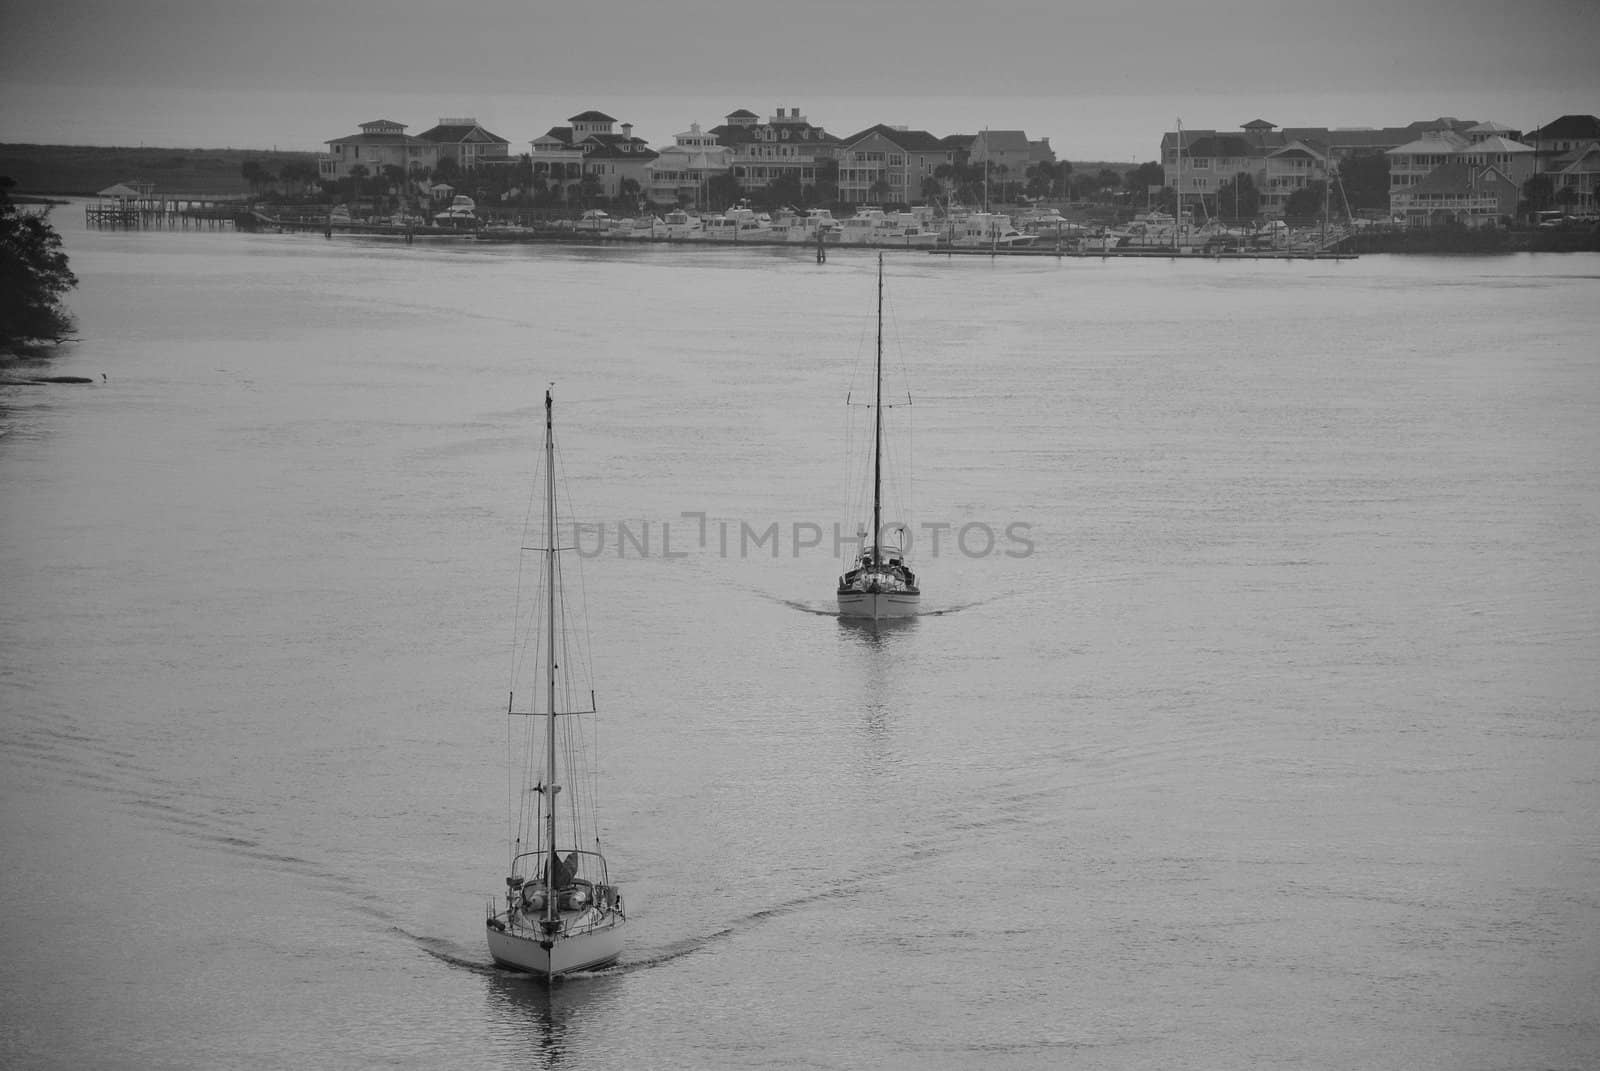 Two ships heading out for the day along the intercoastal waterway